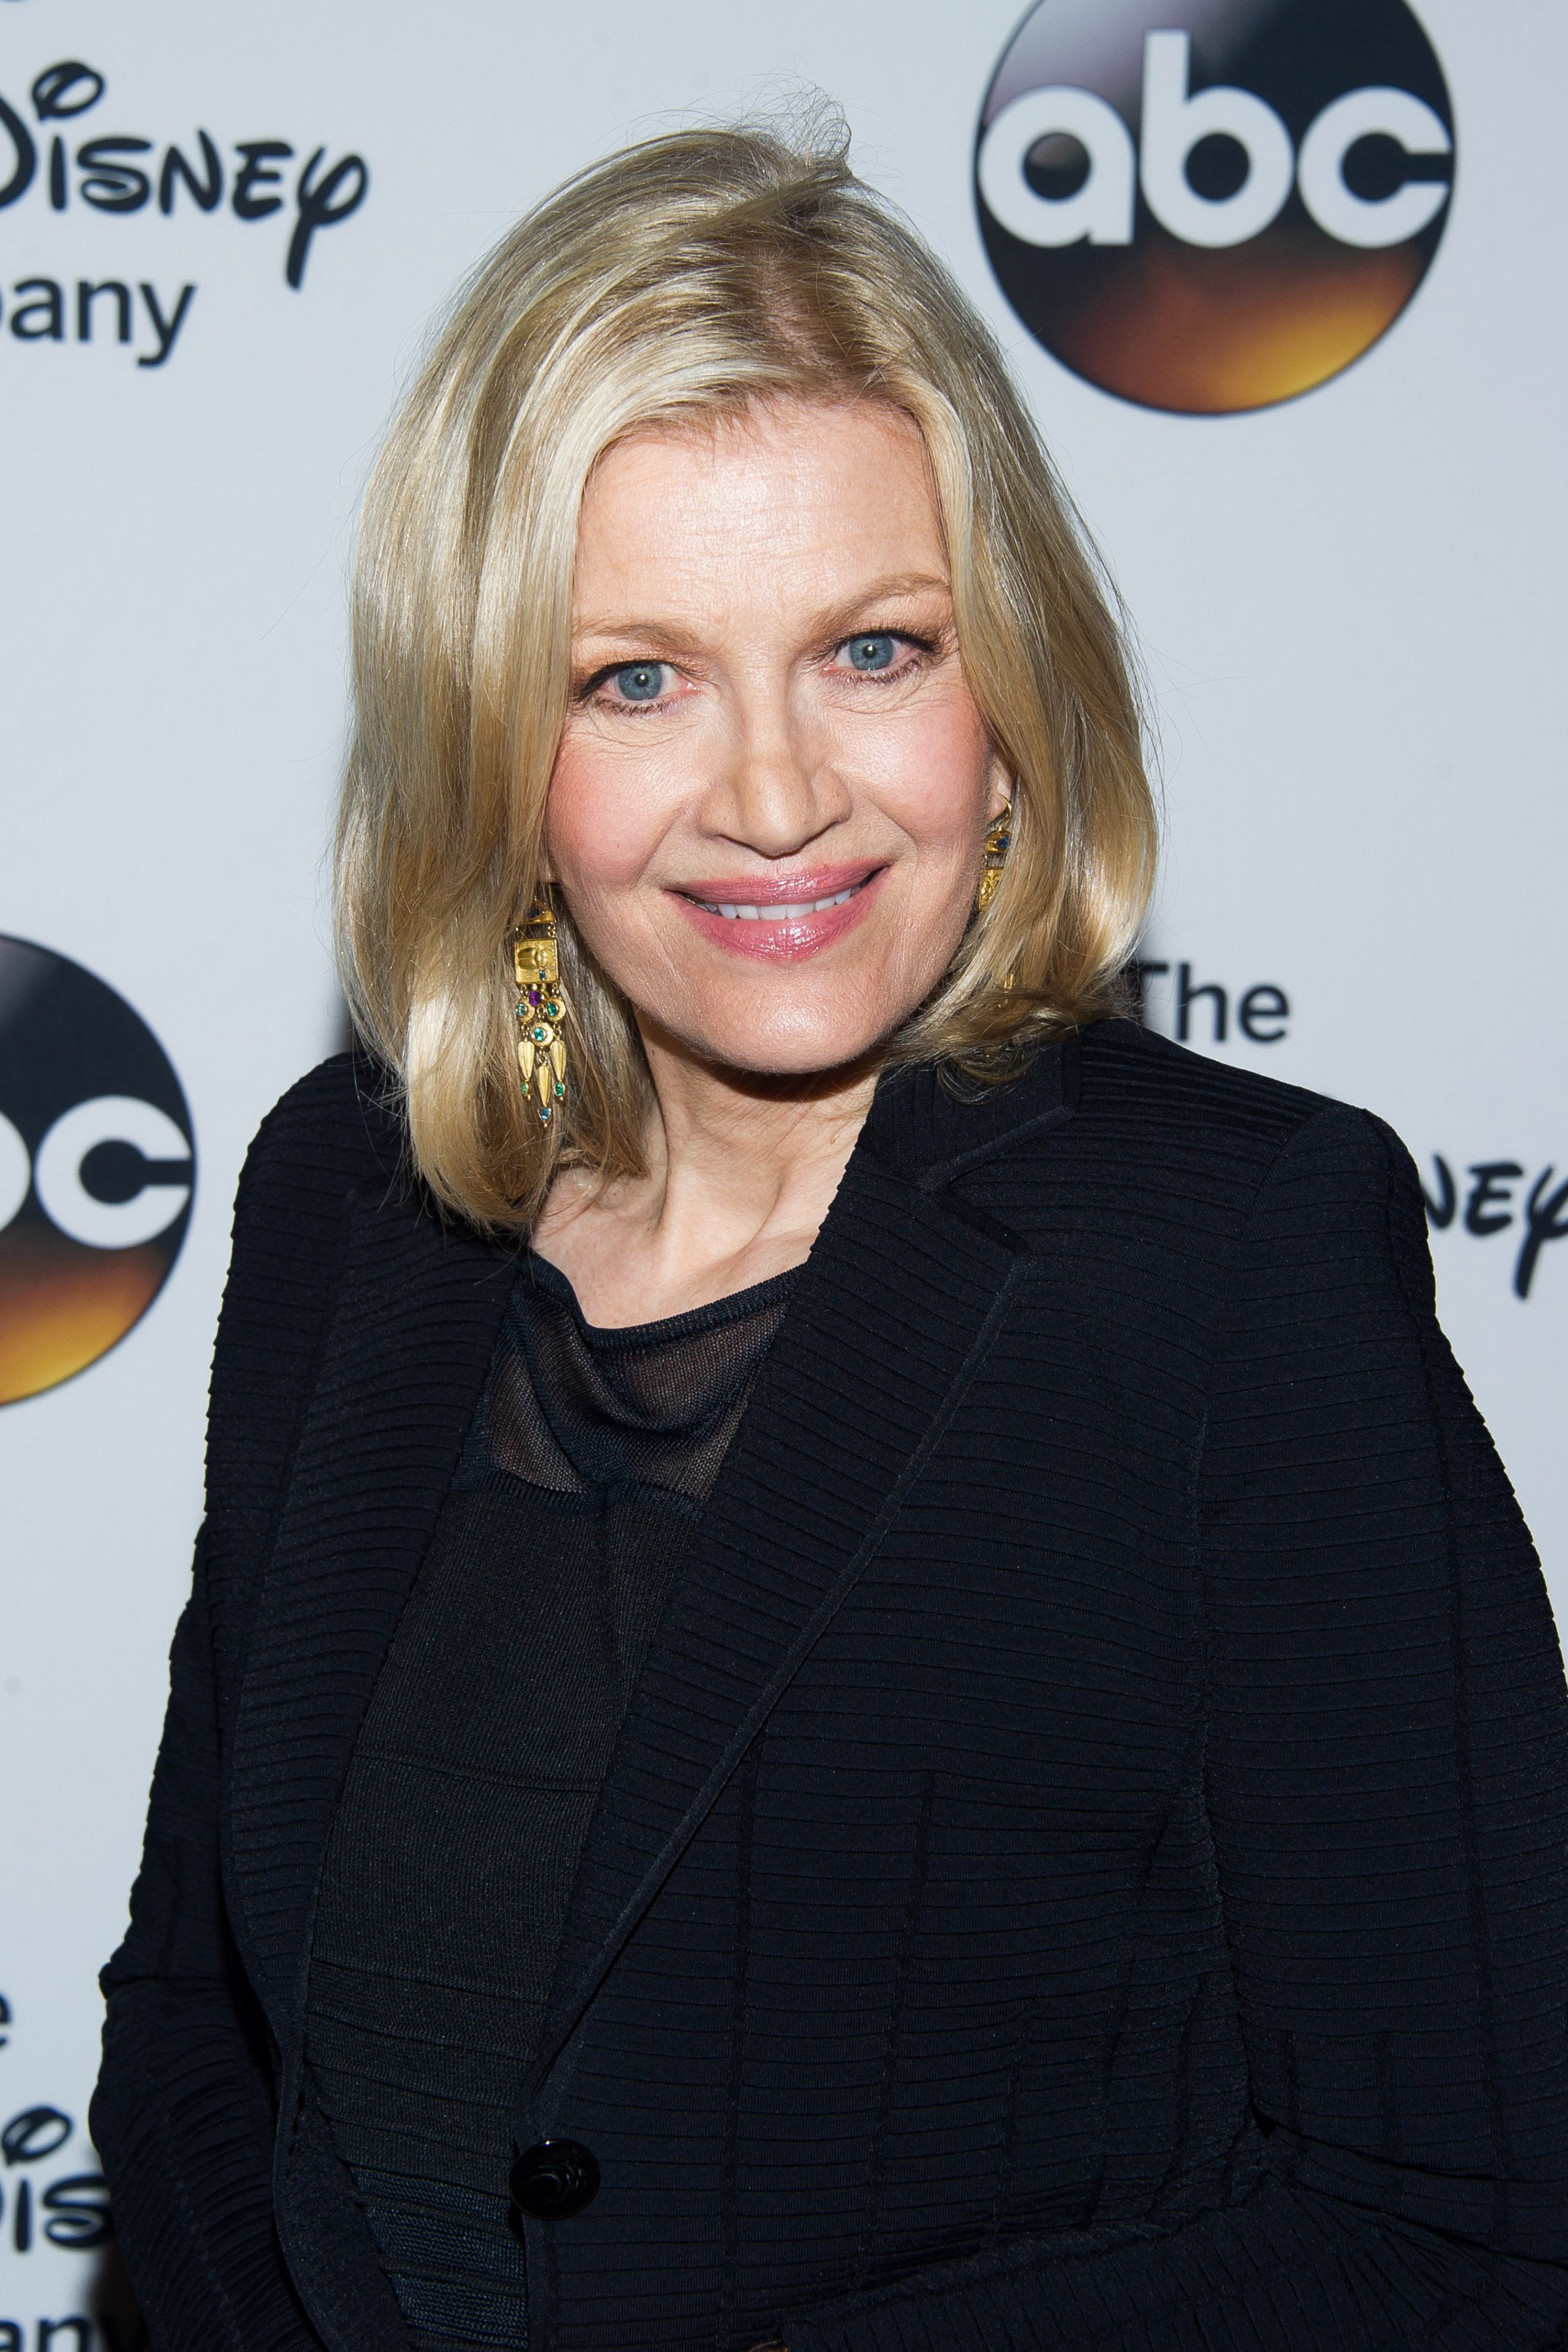 Diane Sawyer attends 'A Celebration of Barbara Walters' in New York City on May 14, 2014.